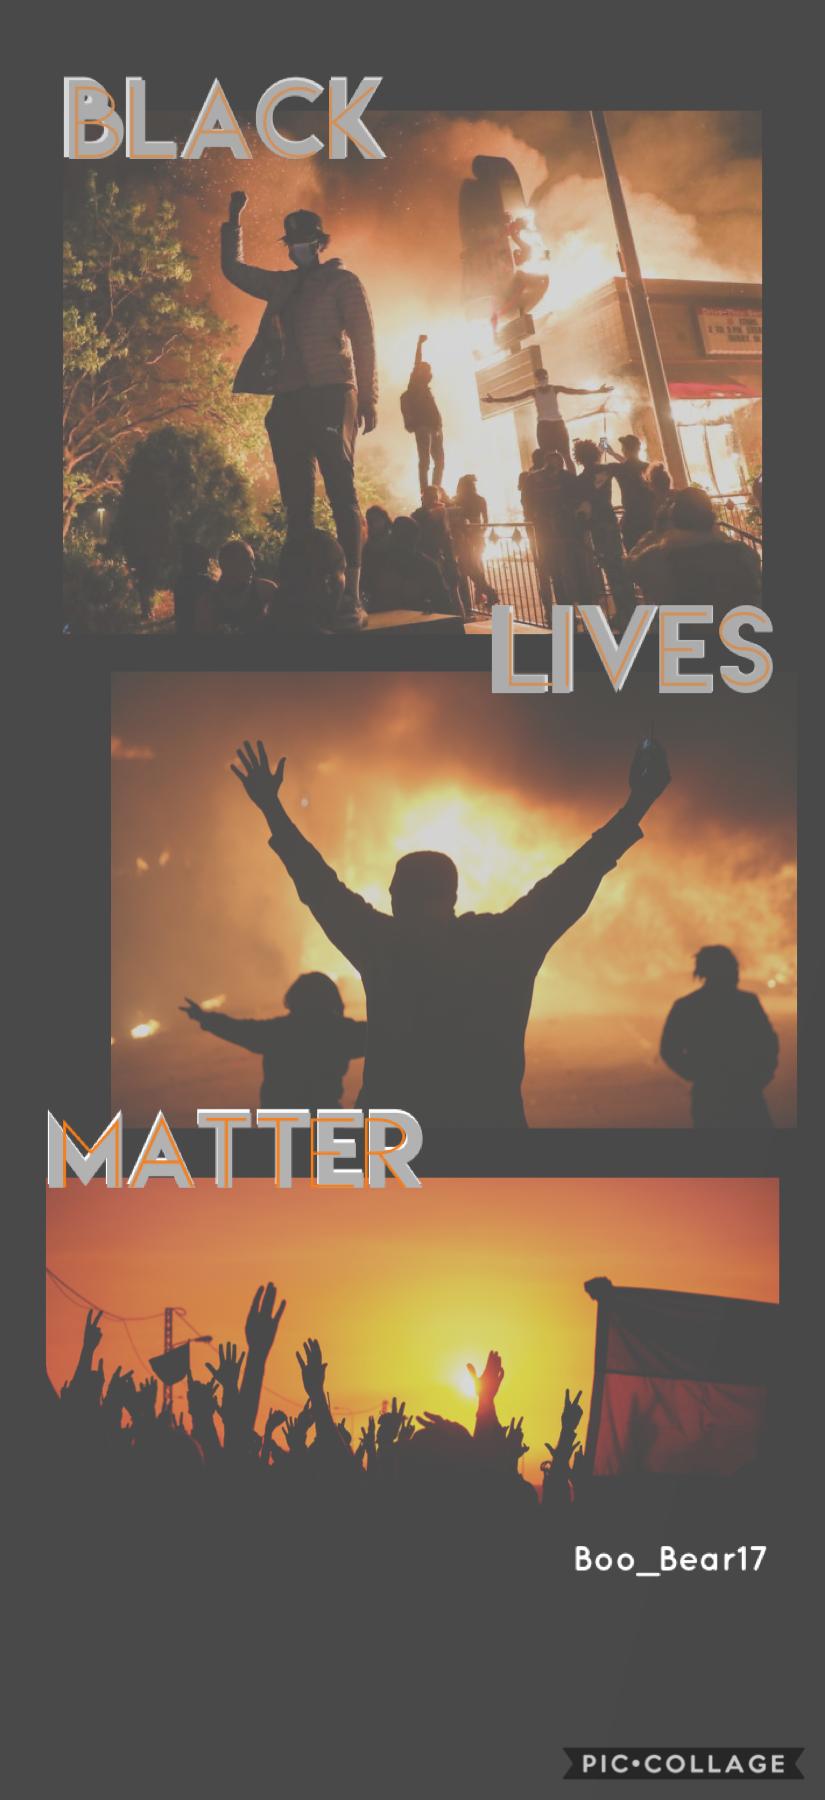 🧡black lives matter🧡
•Equality shouldn’t be a question. We are all one, and the way black lives are being treated is horrendous. Not all cops are bad, but the ones who are need to go. It’s disappointing to see how easily people can harm others solely base